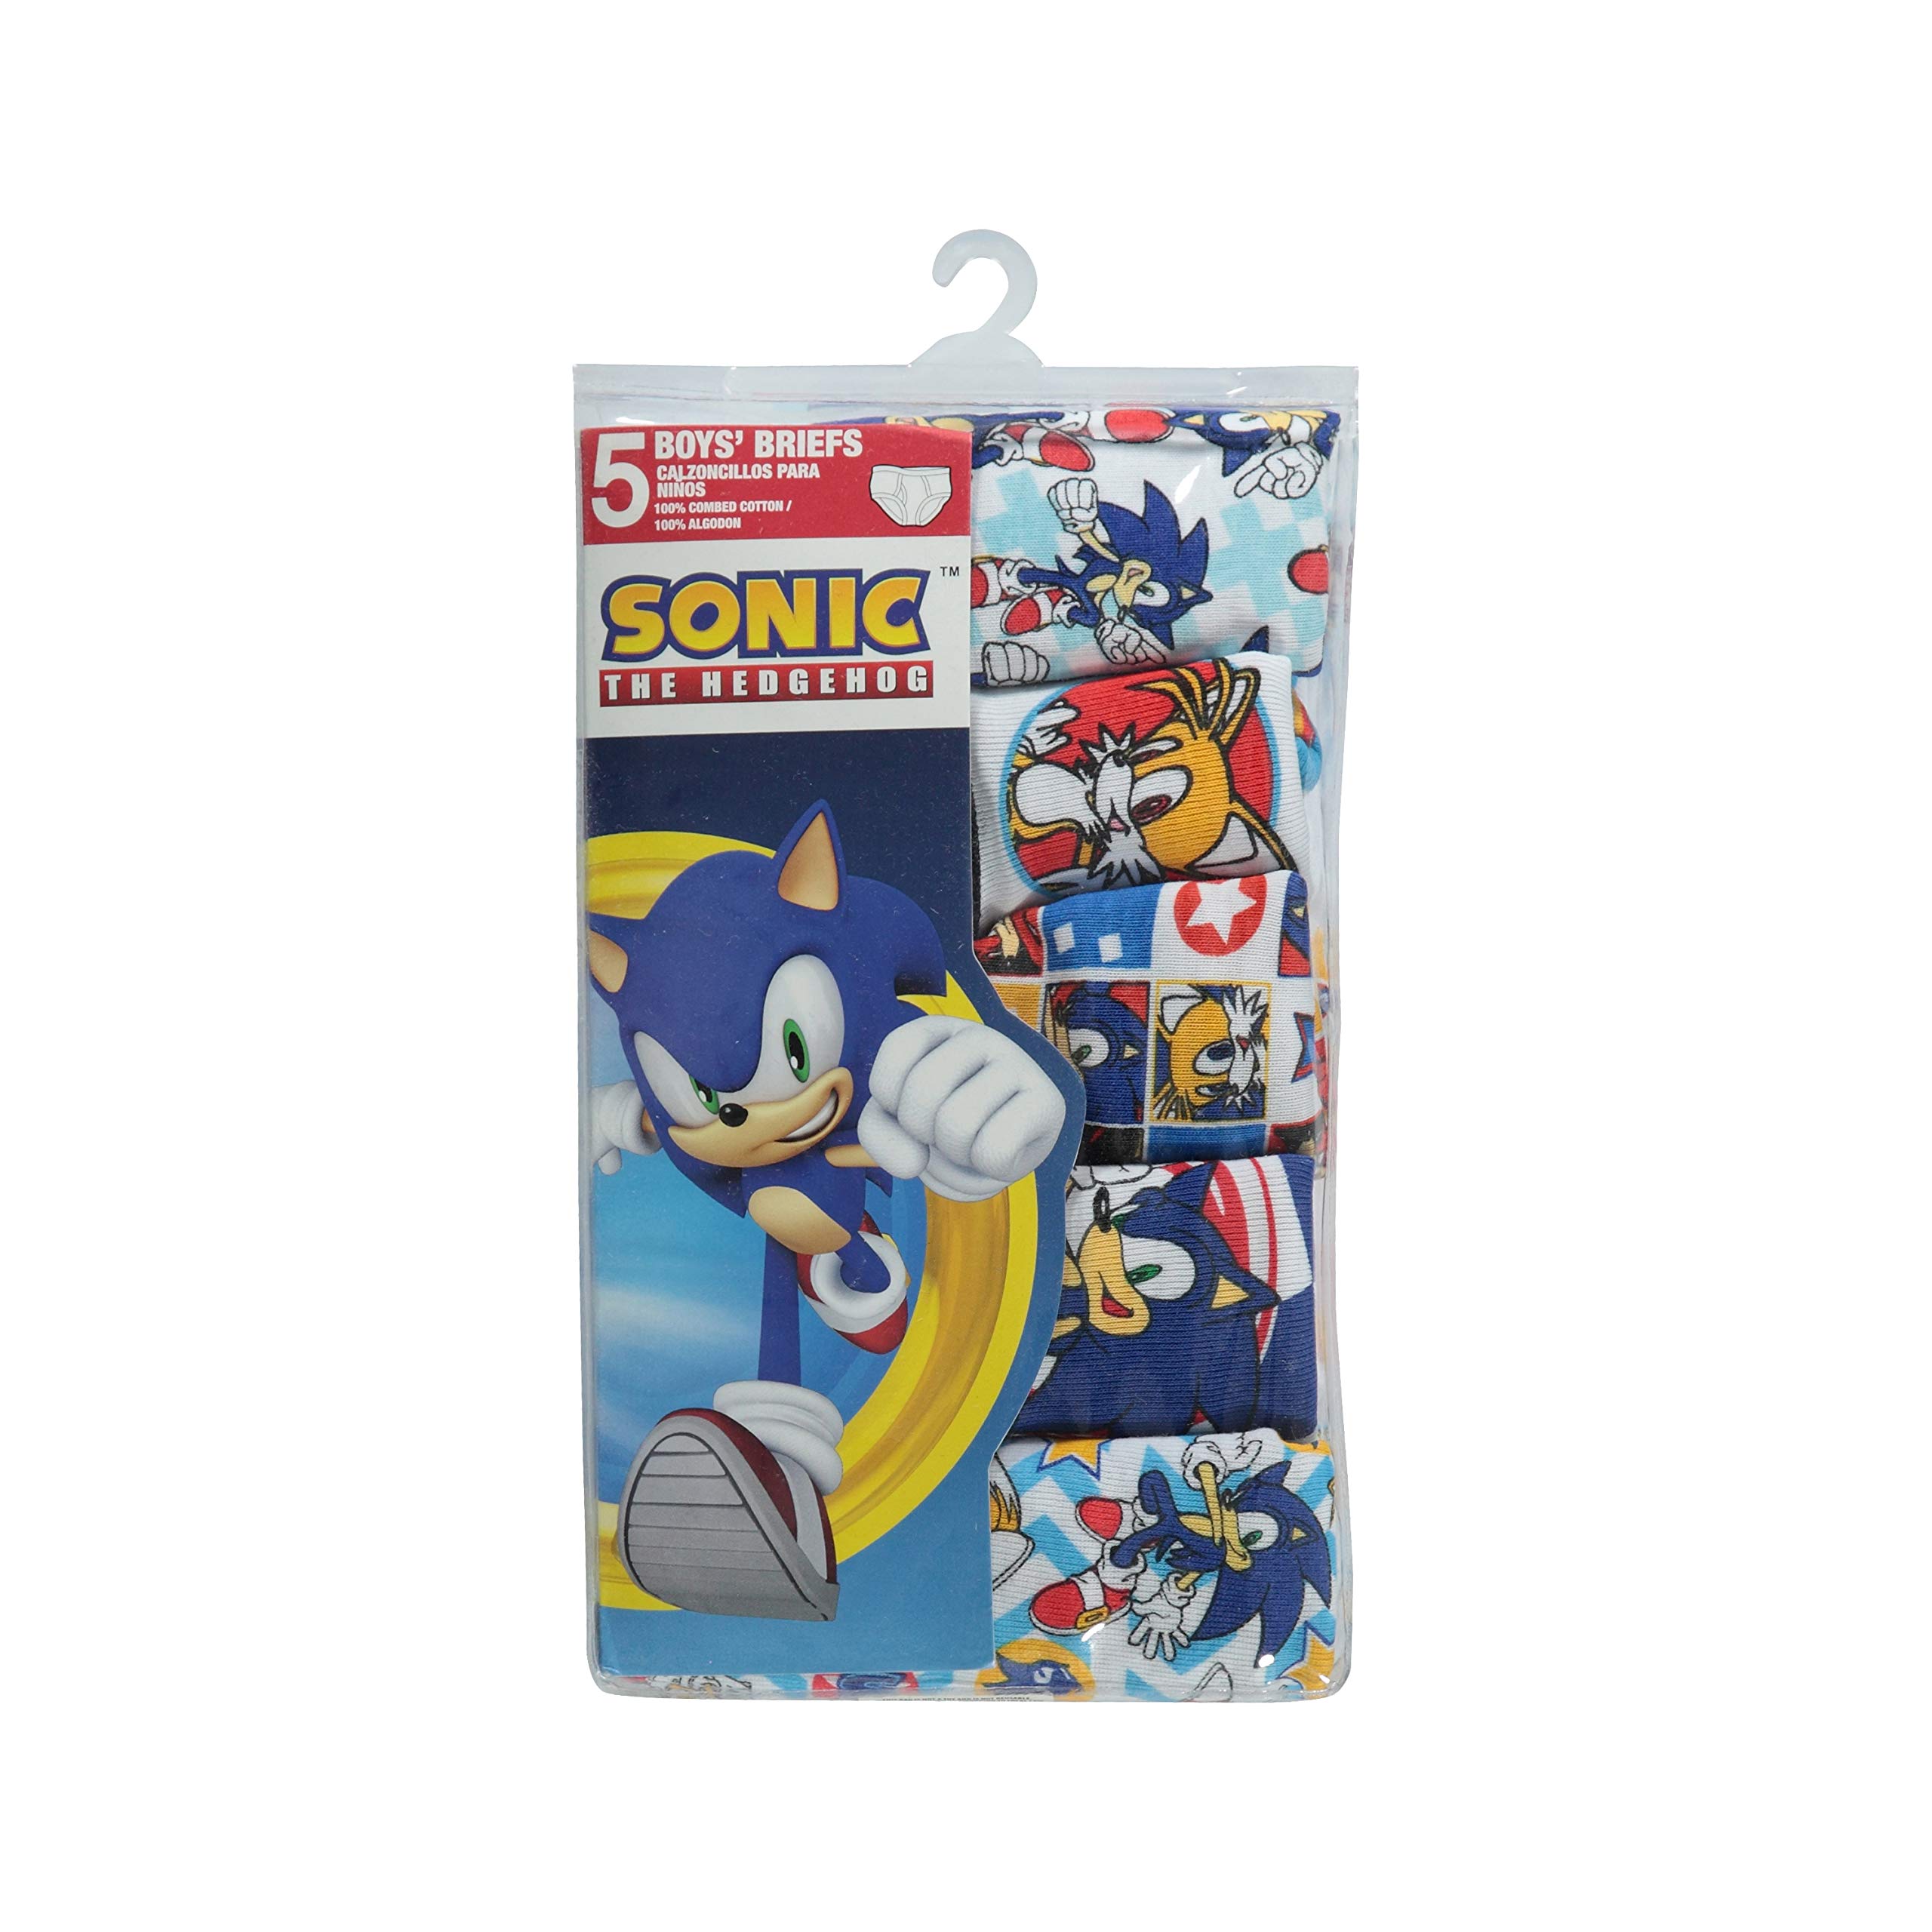 Sonic The Hedgehog Boys' Big Boxer Briefs Multipacks Available in Sizes 4, 6, 8, 10, and 12